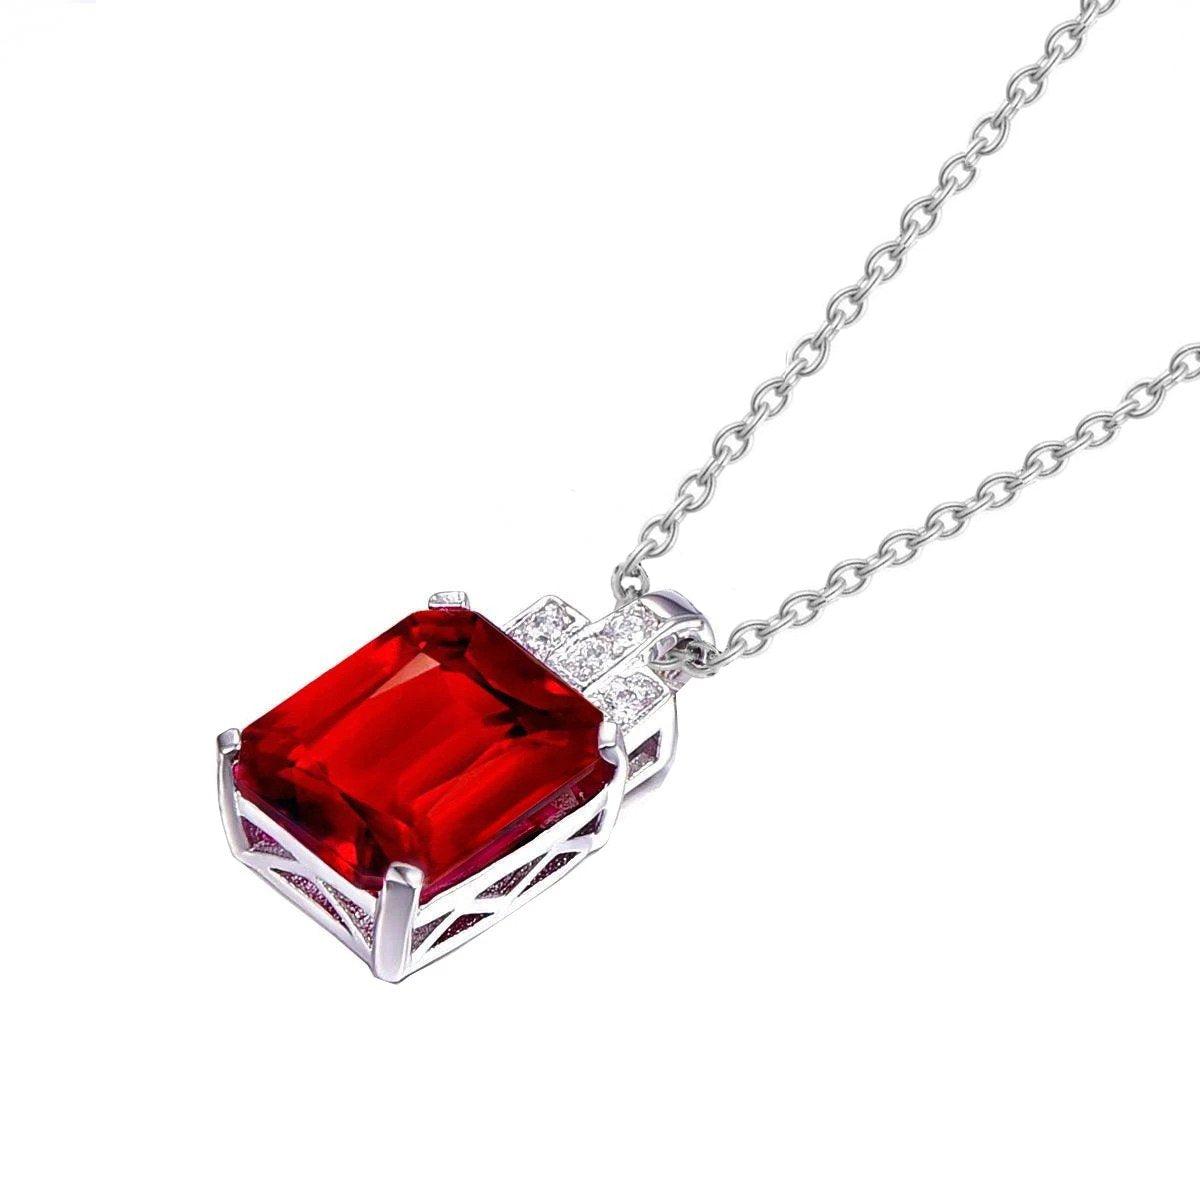 7.70 Ct Ruby And Diamonds Pendant Necklace 14K White Gold